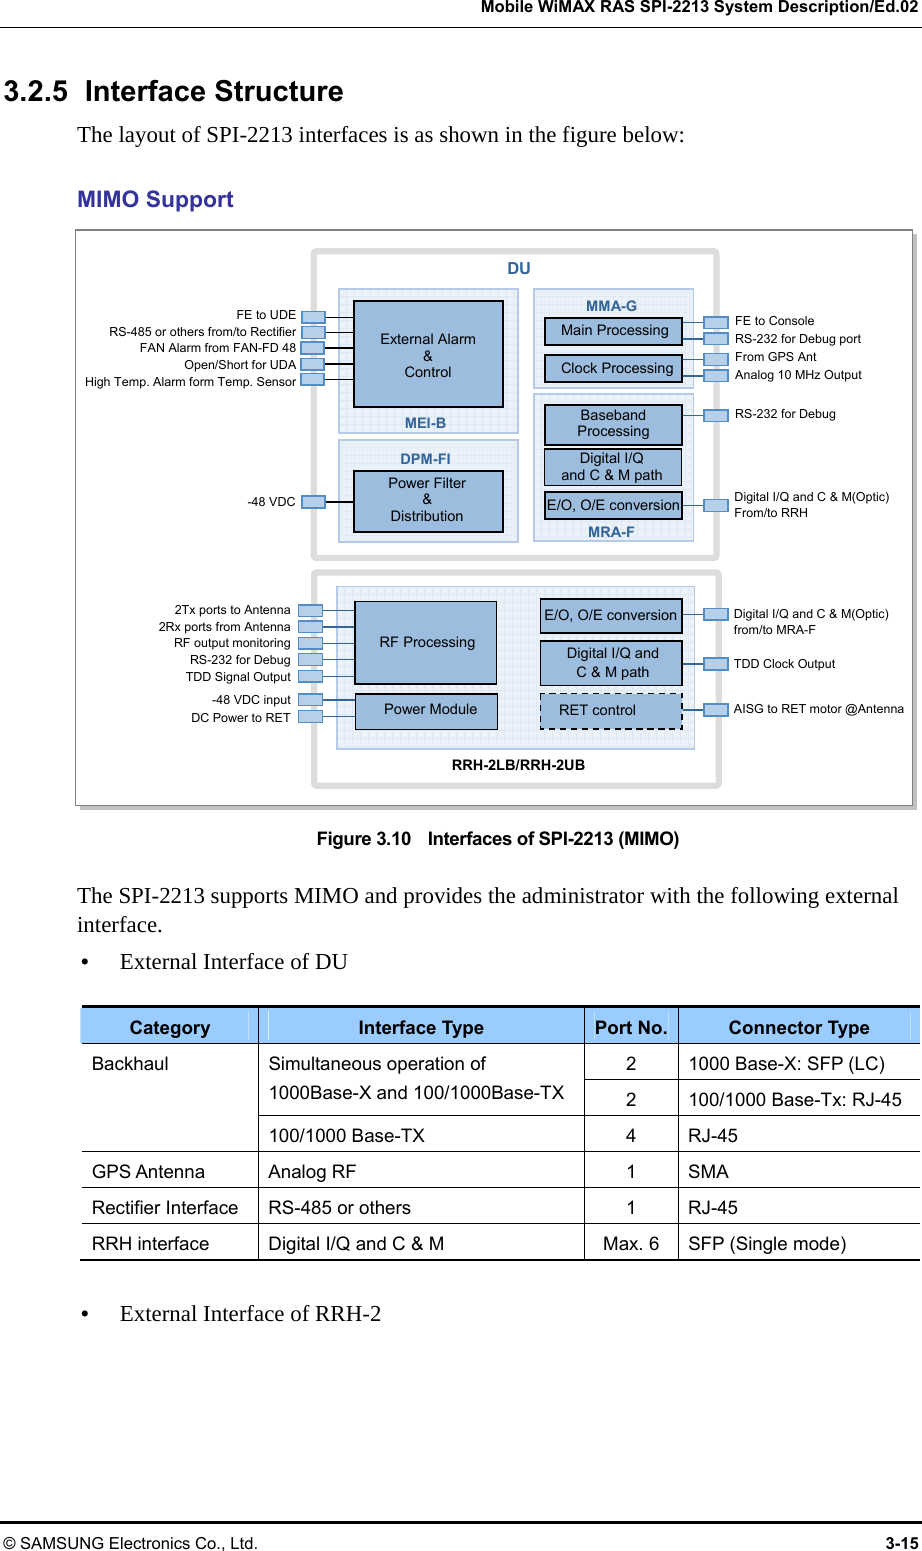   Mobile WiMAX RAS SPI-2213 System Description/Ed.02 © SAMSUNG Electronics Co., Ltd.  3-15 3.2.5 Interface Structure The layout of SPI-2213 interfaces is as shown in the figure below:  MIMO Support Figure 3.10    Interfaces of SPI-2213 (MIMO)  The SPI-2213 supports MIMO and provides the administrator with the following external interface. y External Interface of DU  Category  Interface Type  Port No. Connector Type 2  1000 Base-X: SFP (LC) Simultaneous operation of 1000Base-X and 100/1000Base-TX  2  100/1000 Base-Tx: RJ-45Backhaul 100/1000 Base-TX  4  RJ-45 GPS Antenna  Analog RF  1  SMA Rectifier Interface  RS-485 or others  1  RJ-45 RRH interface  Digital I/Q and C &amp; M  Max. 6 SFP (Single mode)  y External Interface of RRH-2 MMA-G DU MEI-B Main ProcessingClock ProcessingPower Filter&amp; Distribution DPM-FI MRA-F Digital I/Q   and C &amp; M pathBaseband ProcessingExternal Alarm&amp; Control FE to UDE RS-485 or others from/to Rectifier FAN Alarm from FAN-FD 48 Open/Short for UDA High Temp. Alarm form Temp. Sensor -48 VDC FE to Console RS-232 for Debug port From GPS Ant Analog 10 MHz Output   RS-232 for Debug Digital I/Q and C &amp; M(Optic) From/to RRH RRH-2LB/RRH-2UBE/O, O/E conversionRET controlDigital I/Q and C &amp; M(Optic) from/to MRA-F  TDD Clock Output   AISG to RET motor @Antenna Digital I/Q andC &amp; M path E/O, O/E conversion2Tx ports to Antenna 2Rx ports from Antenna RF output monitoring RS-232 for Debug TDD Signal Output -48 VDC input DC Power to RET RF ProcessingPower Module